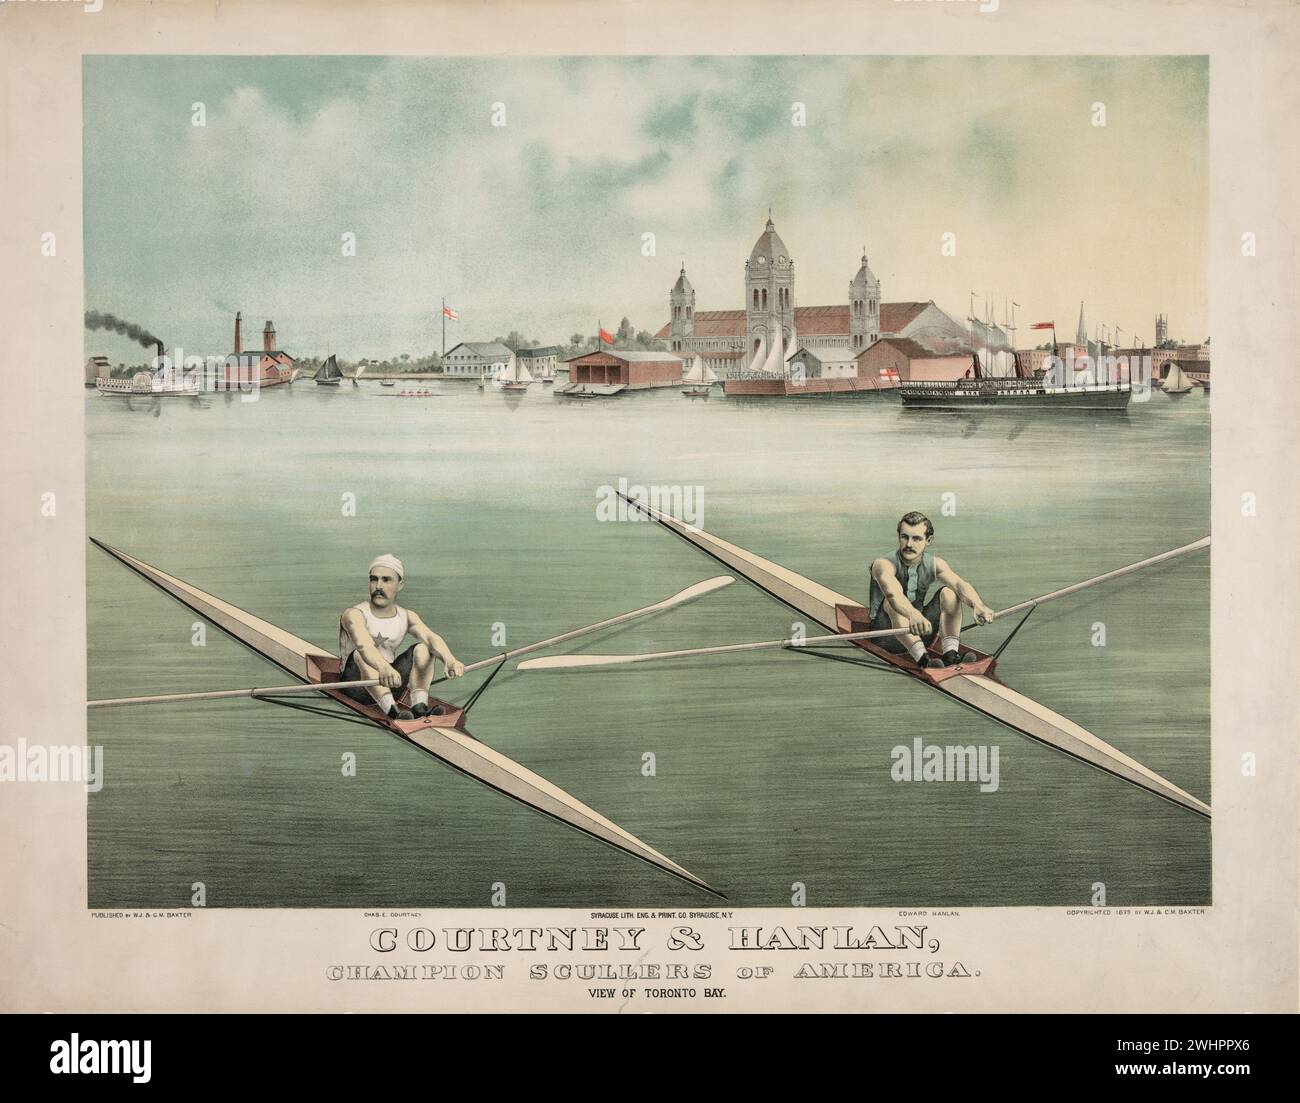 Courtney & Hanlan, champion scullers of America - view of Toronto Bay / Syracuse Lith. Eng. & Print. Co, Syracuse, N.Y.   .  Print showing Charles E. Courtney and Edward Hanlan sitting in racing shells with oars on the Toronto Bay. Stock Photo